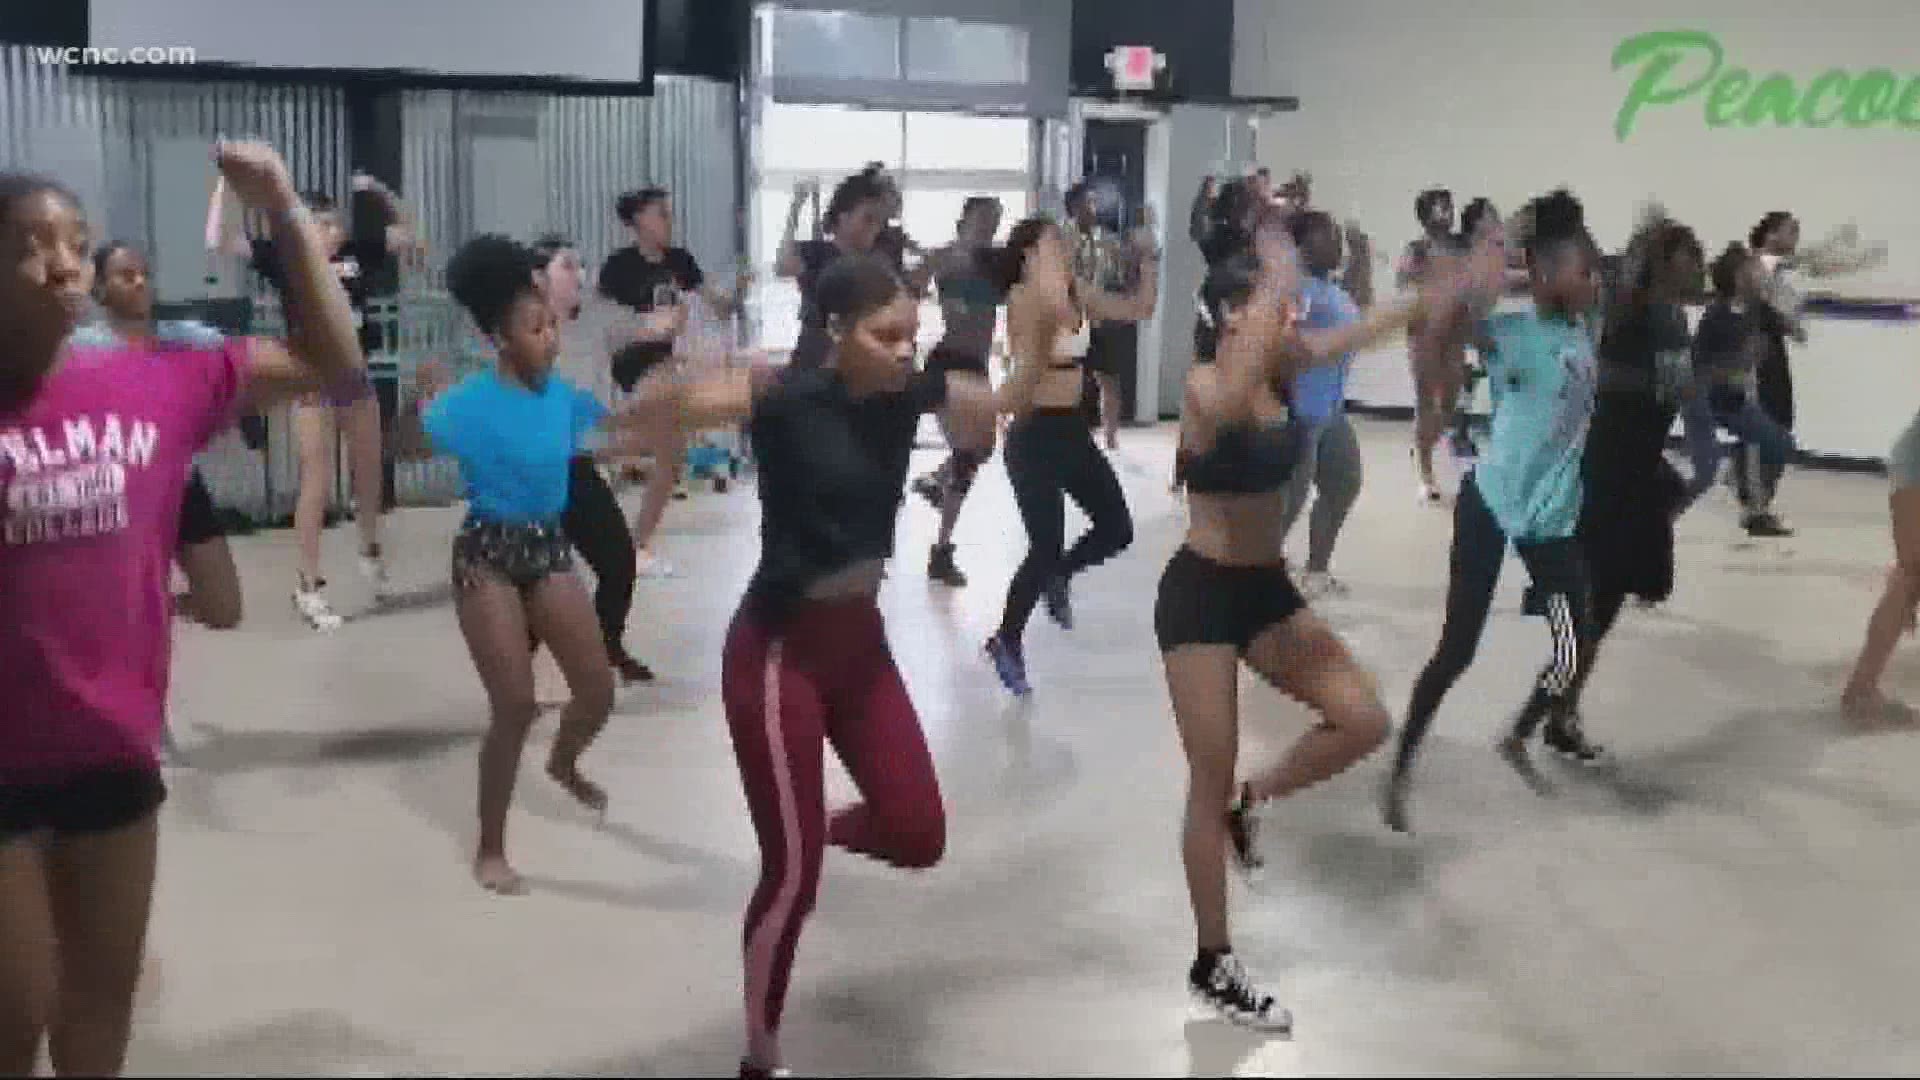 Why Precision Dance studio is now leaning on the community for help